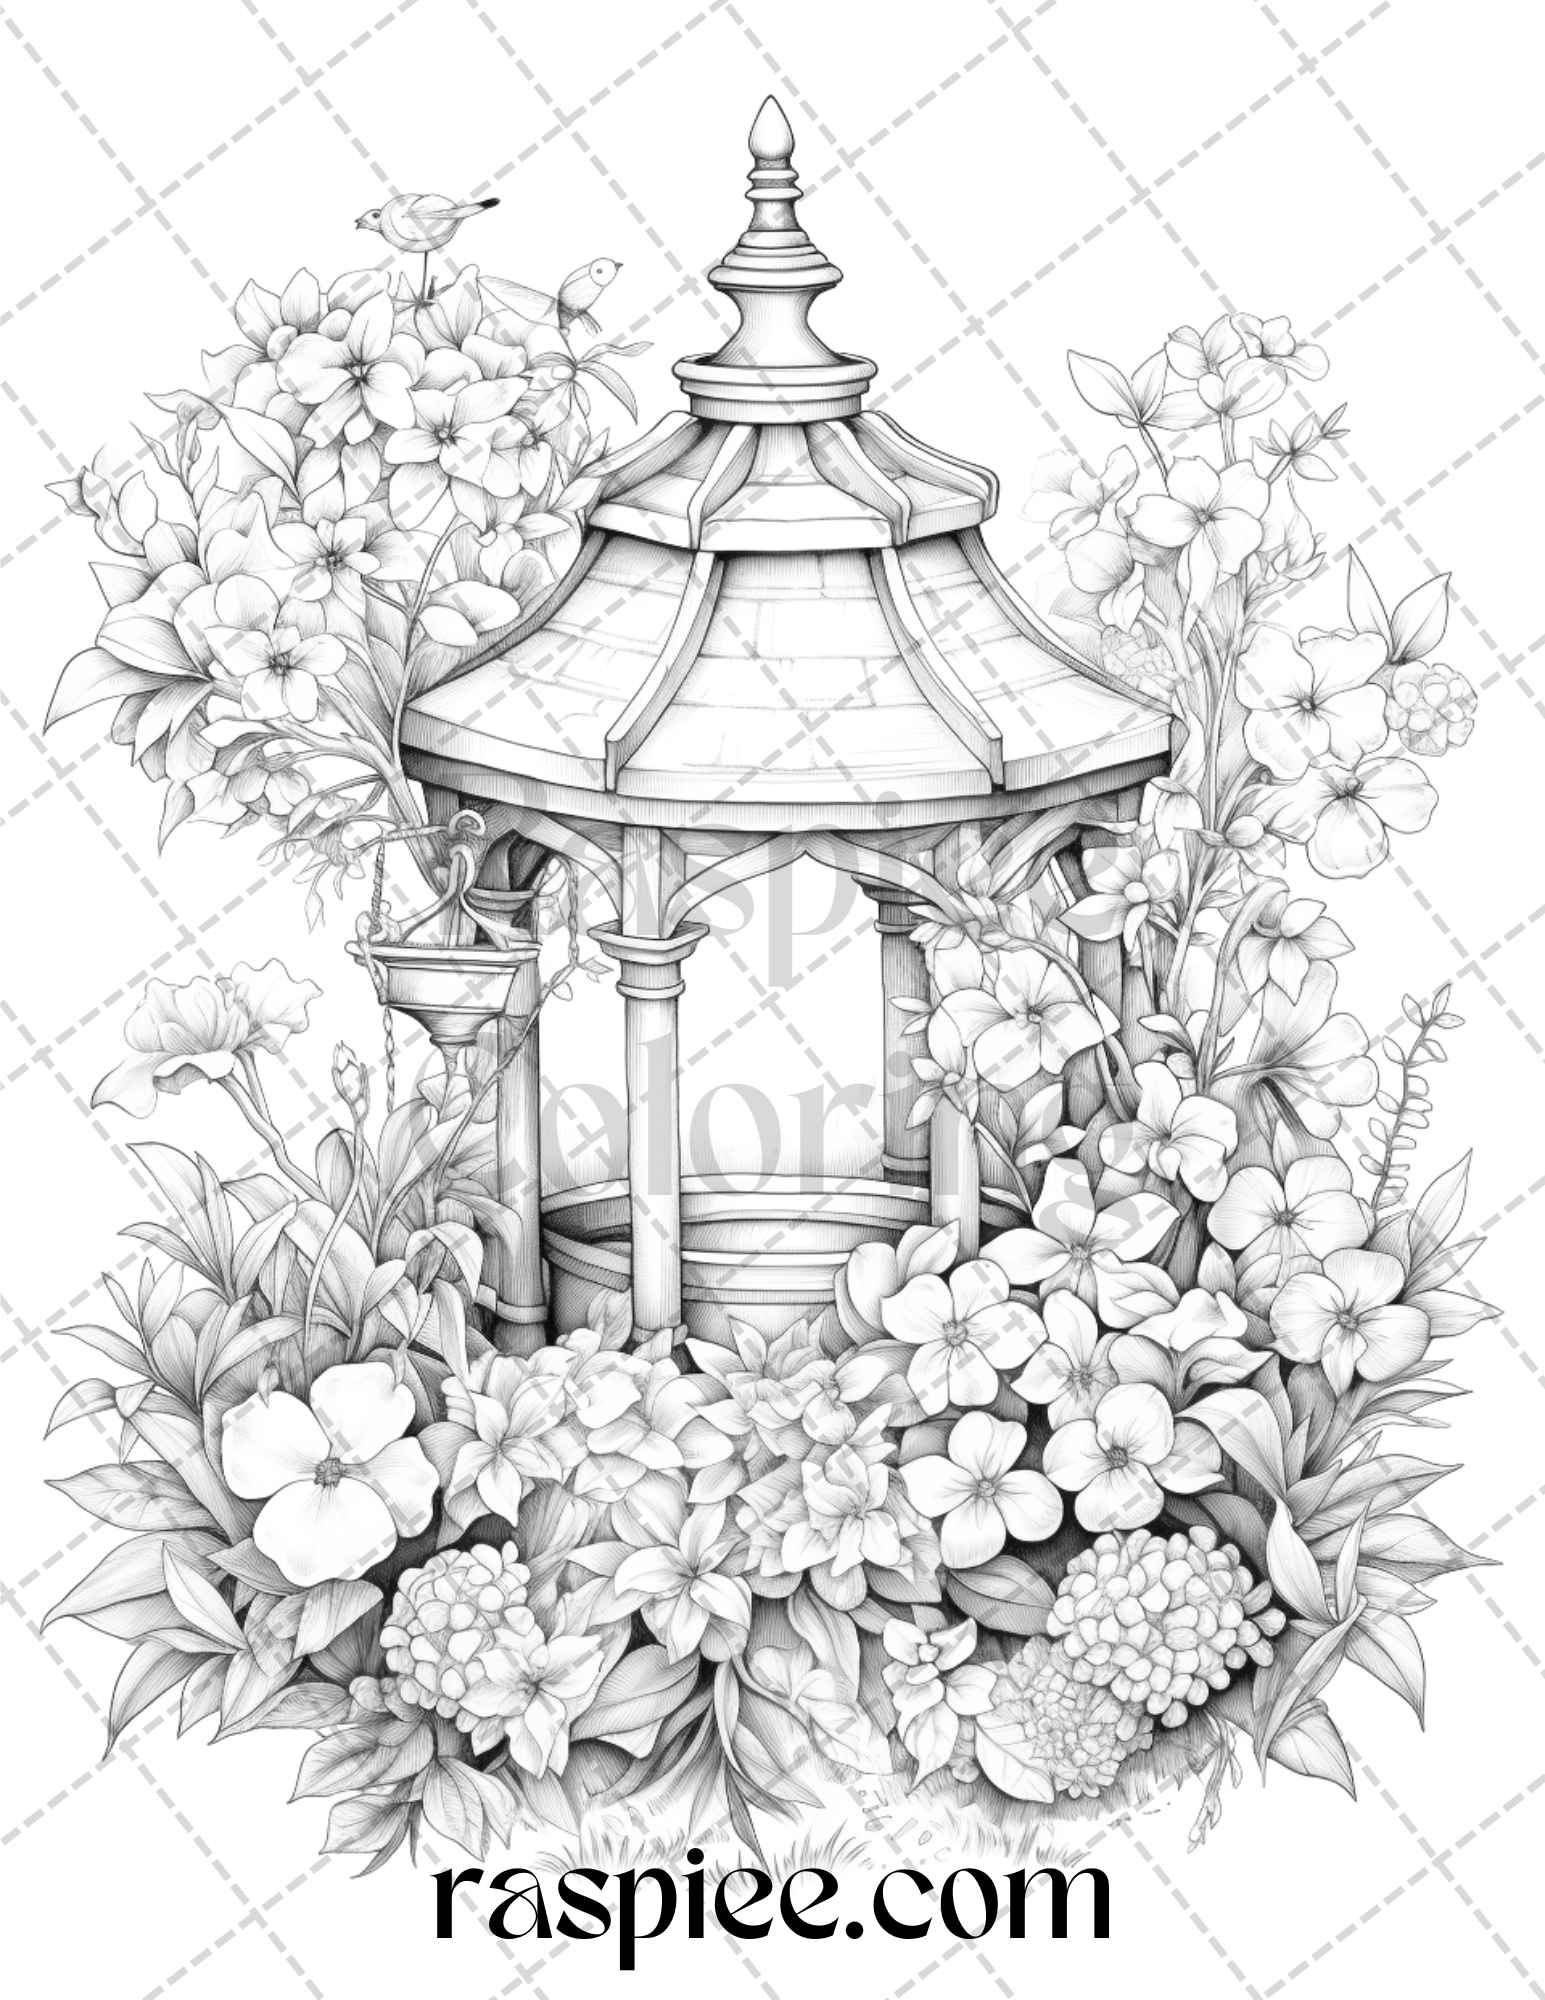 grayscale coloring pages, printable for adults, whimsical wishing wells, coloring book, stress relief, intricate designs